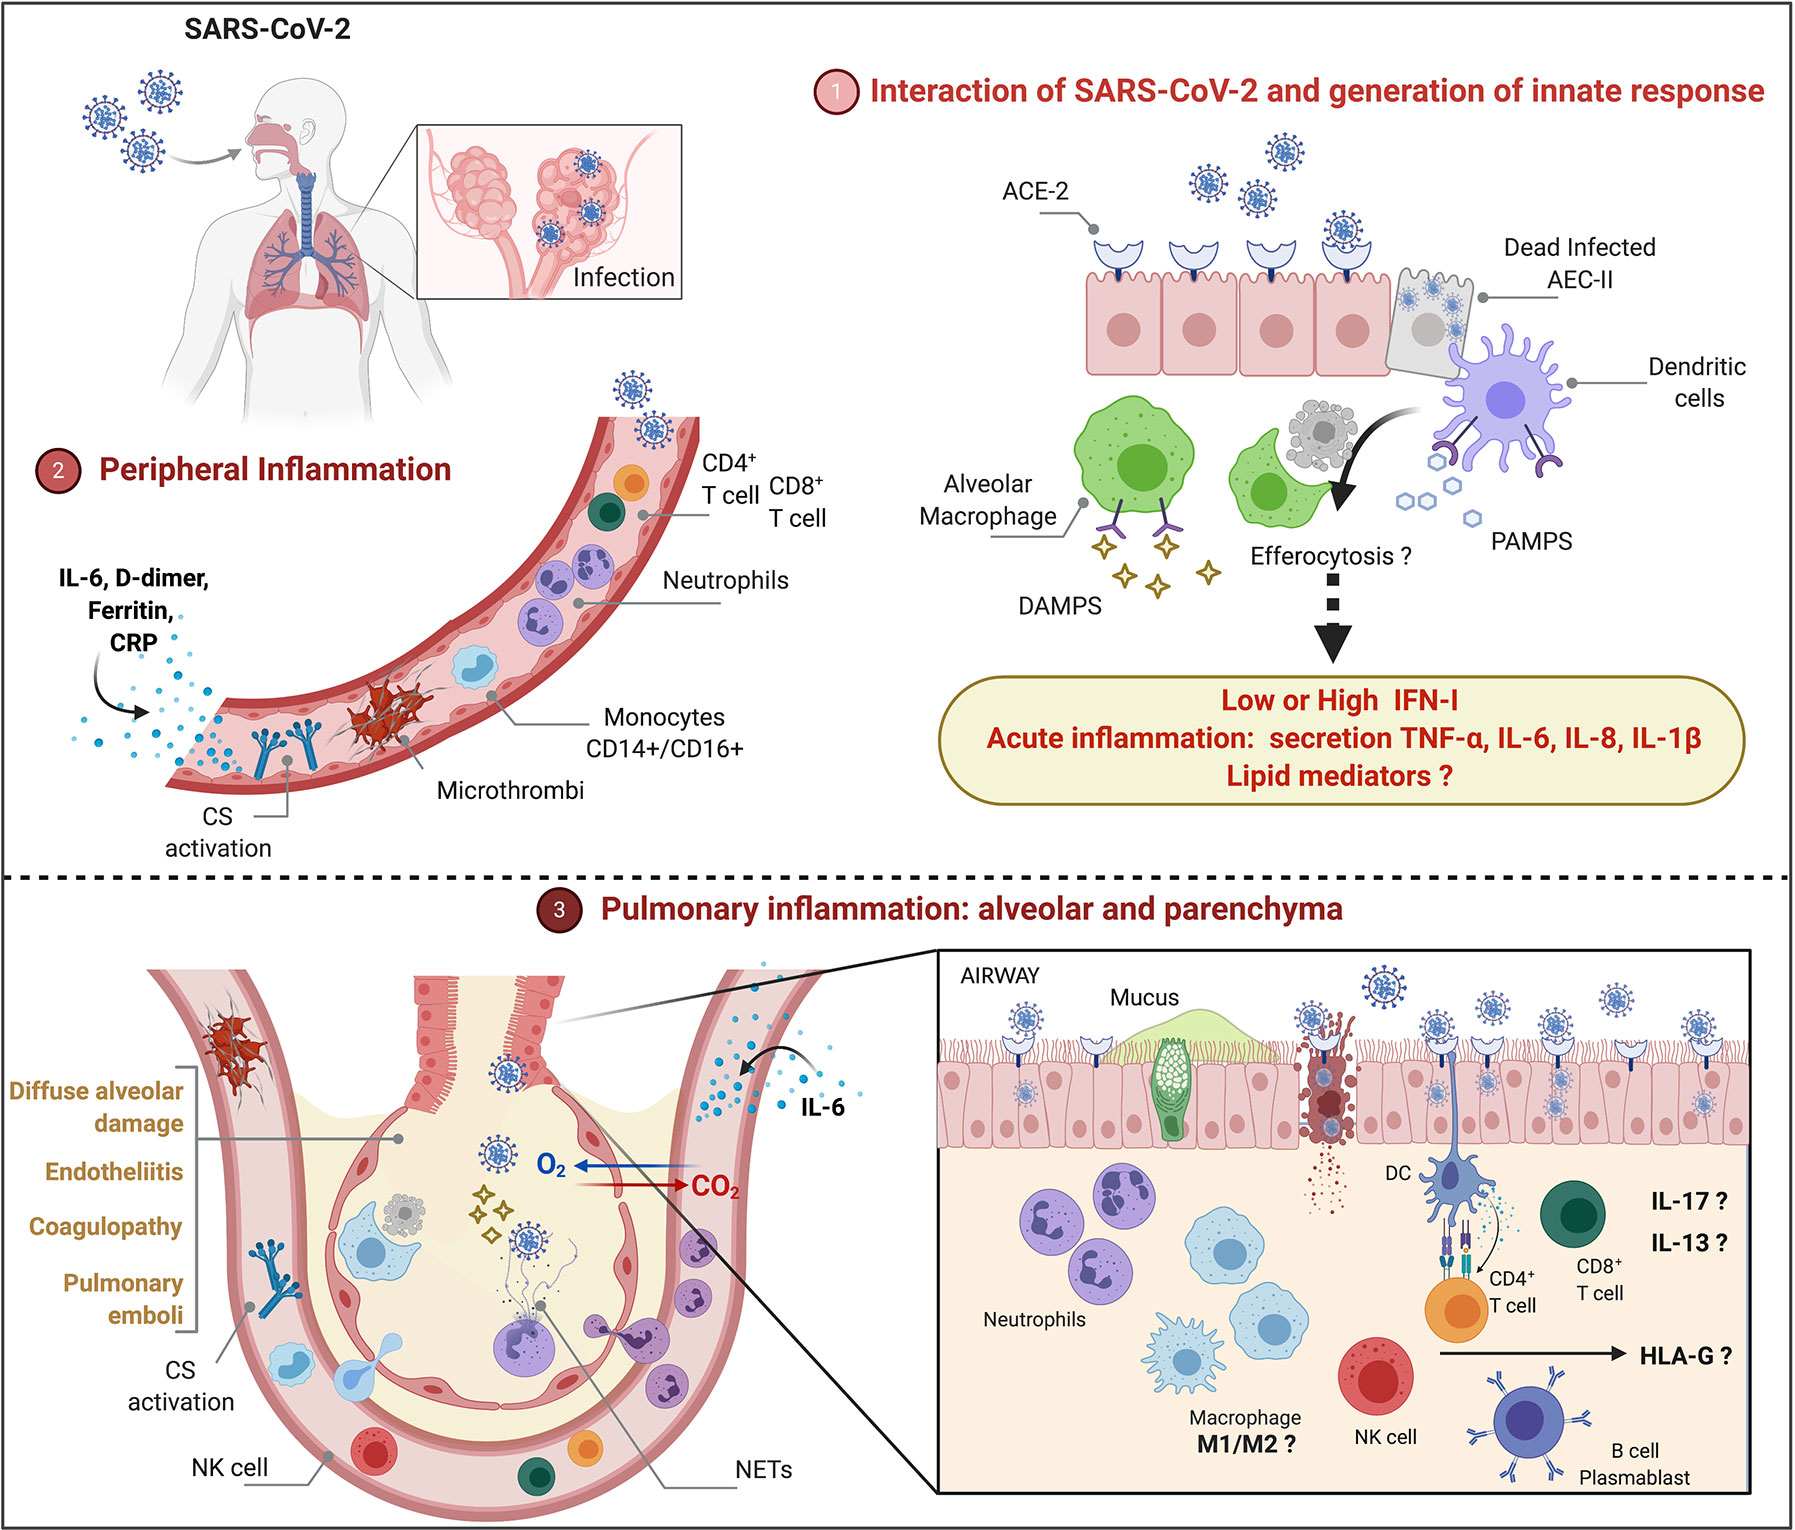 Frontiers COVID-19 Integrating the Complexity of Systemic and Pulmonary Immunopathology to Identify Biomarkers for Different Outcomes